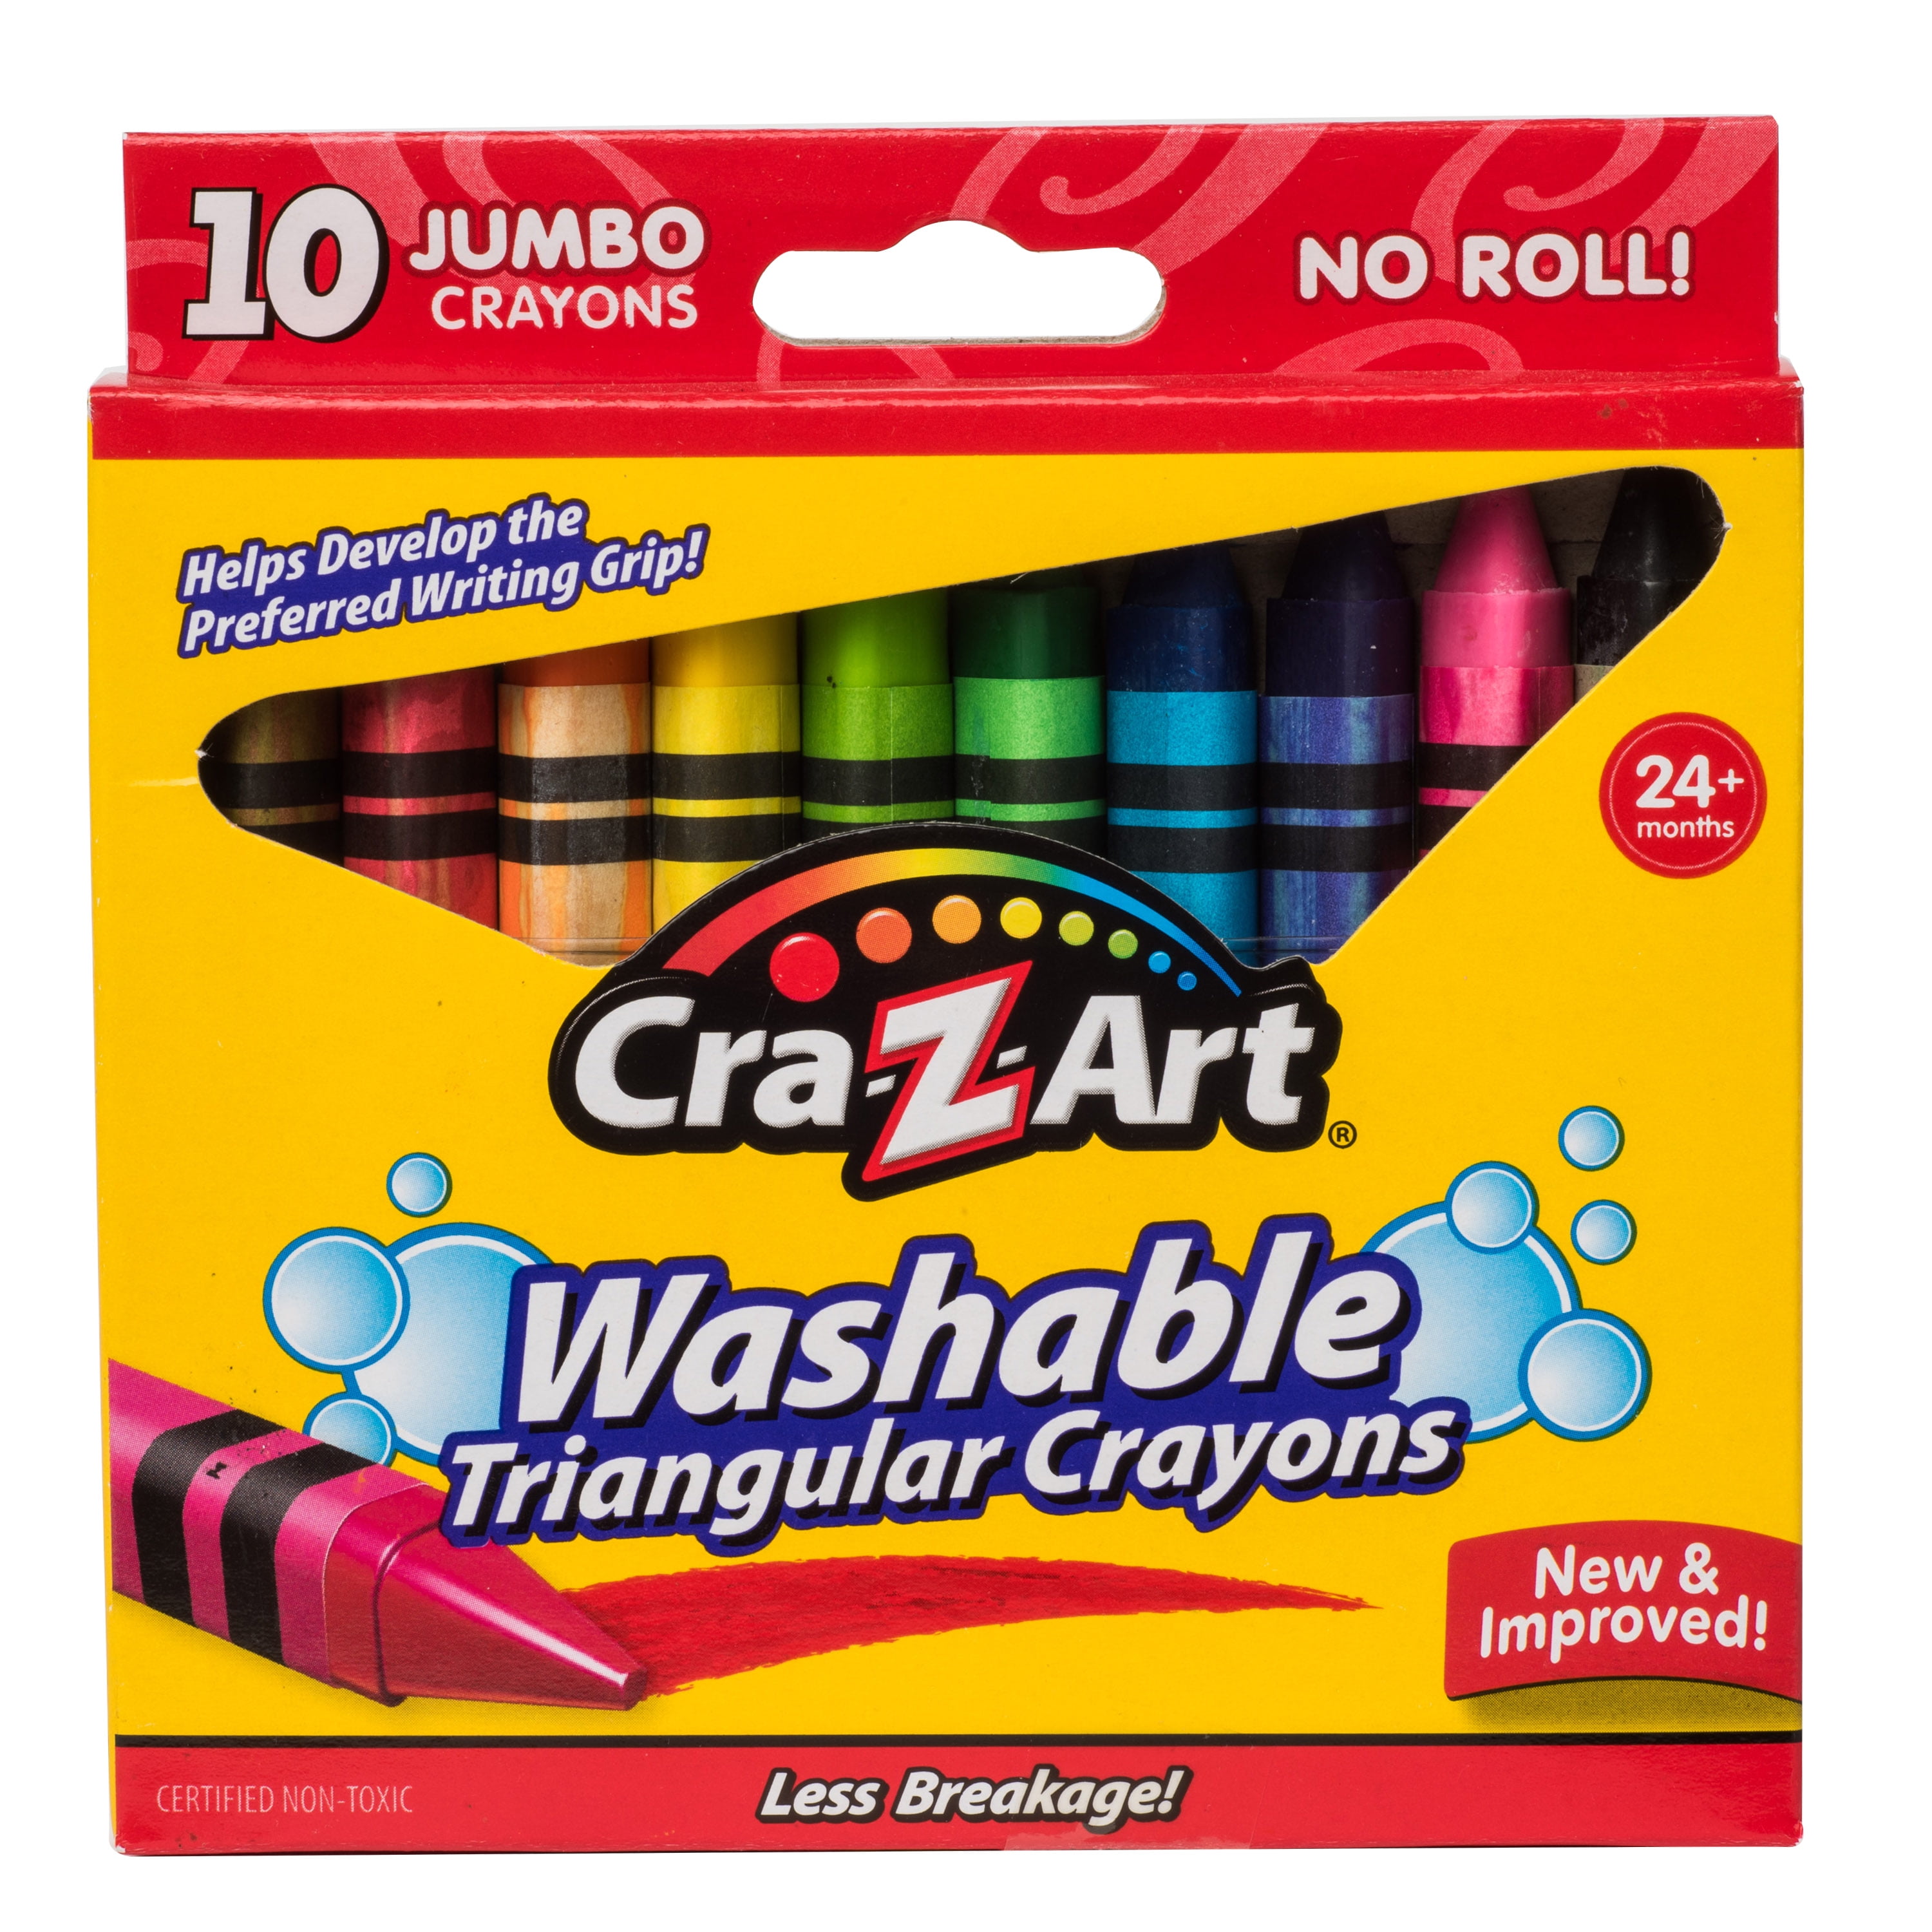 Triangle and Round Crayons for Kids